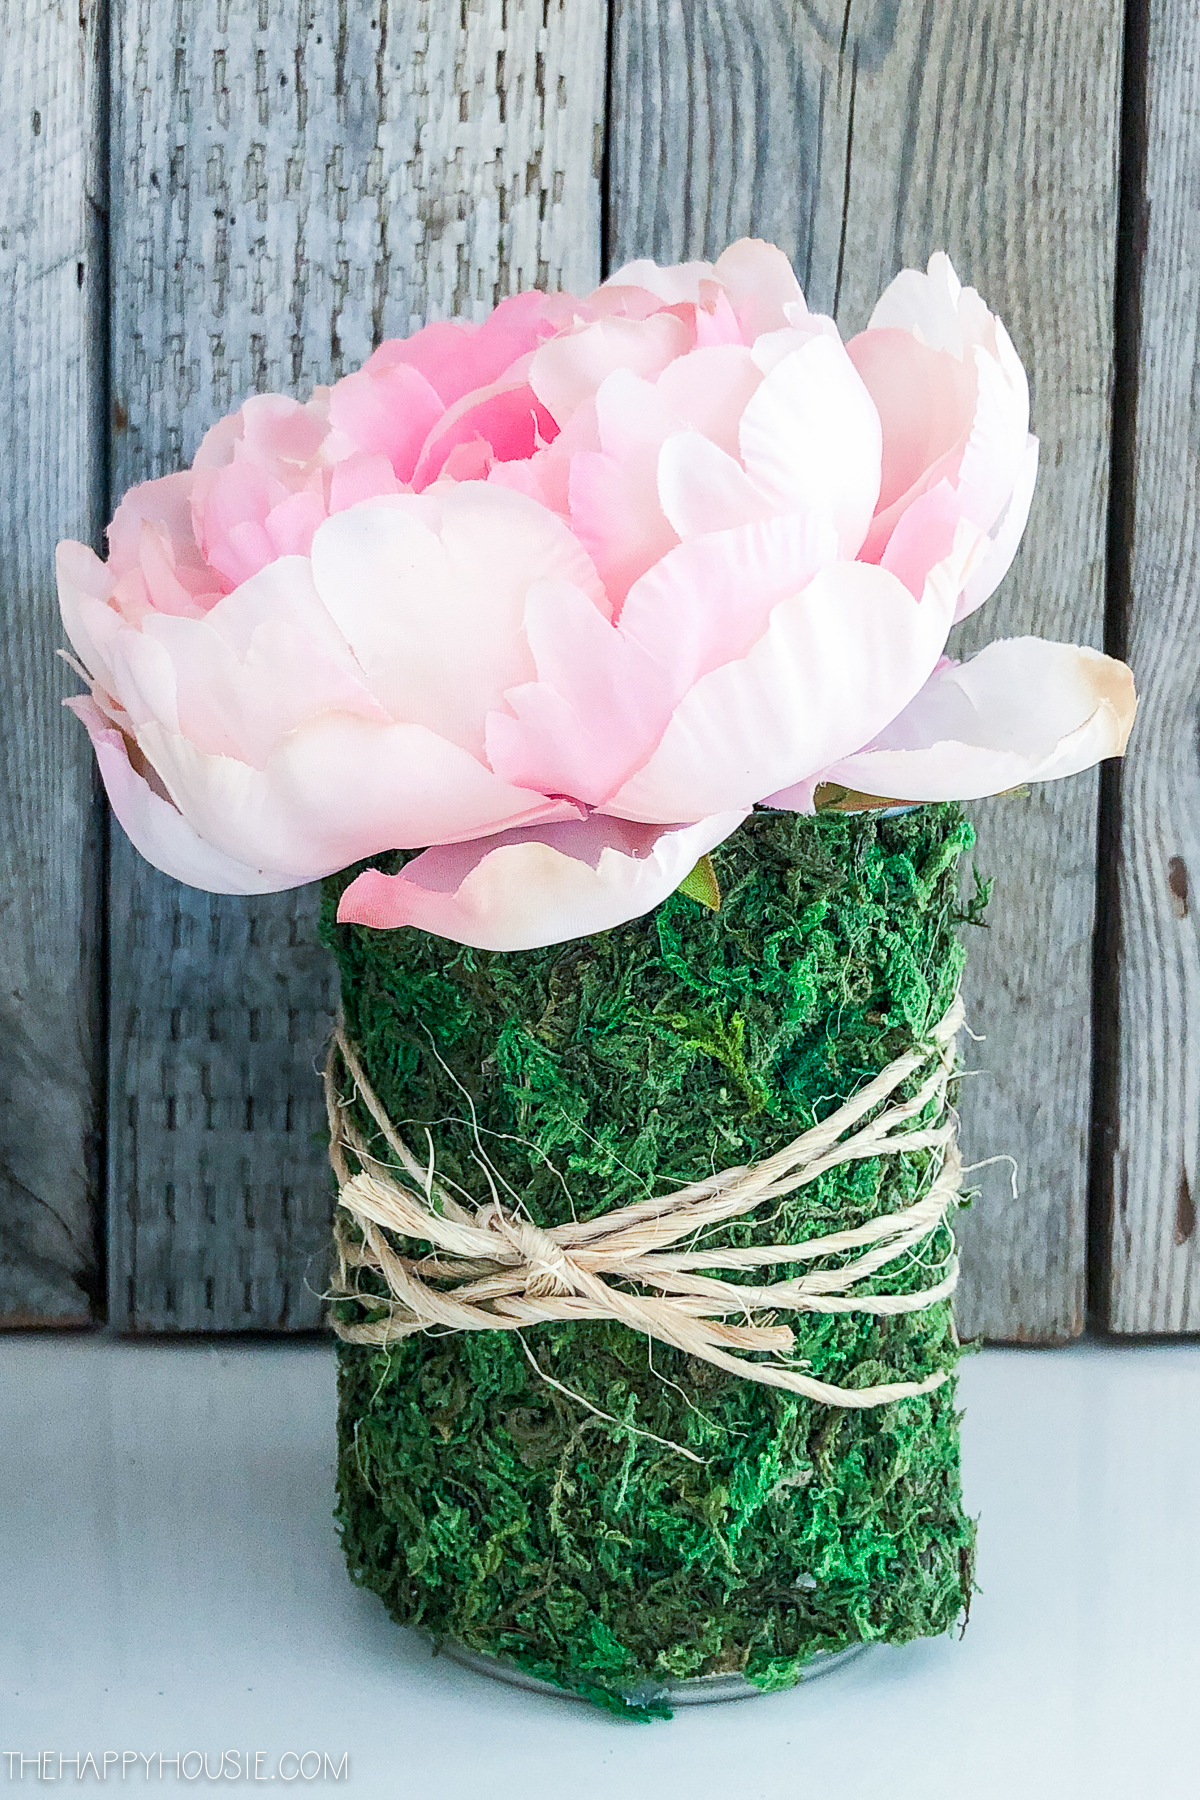 Up close picture of the pink peony in the moss vase.